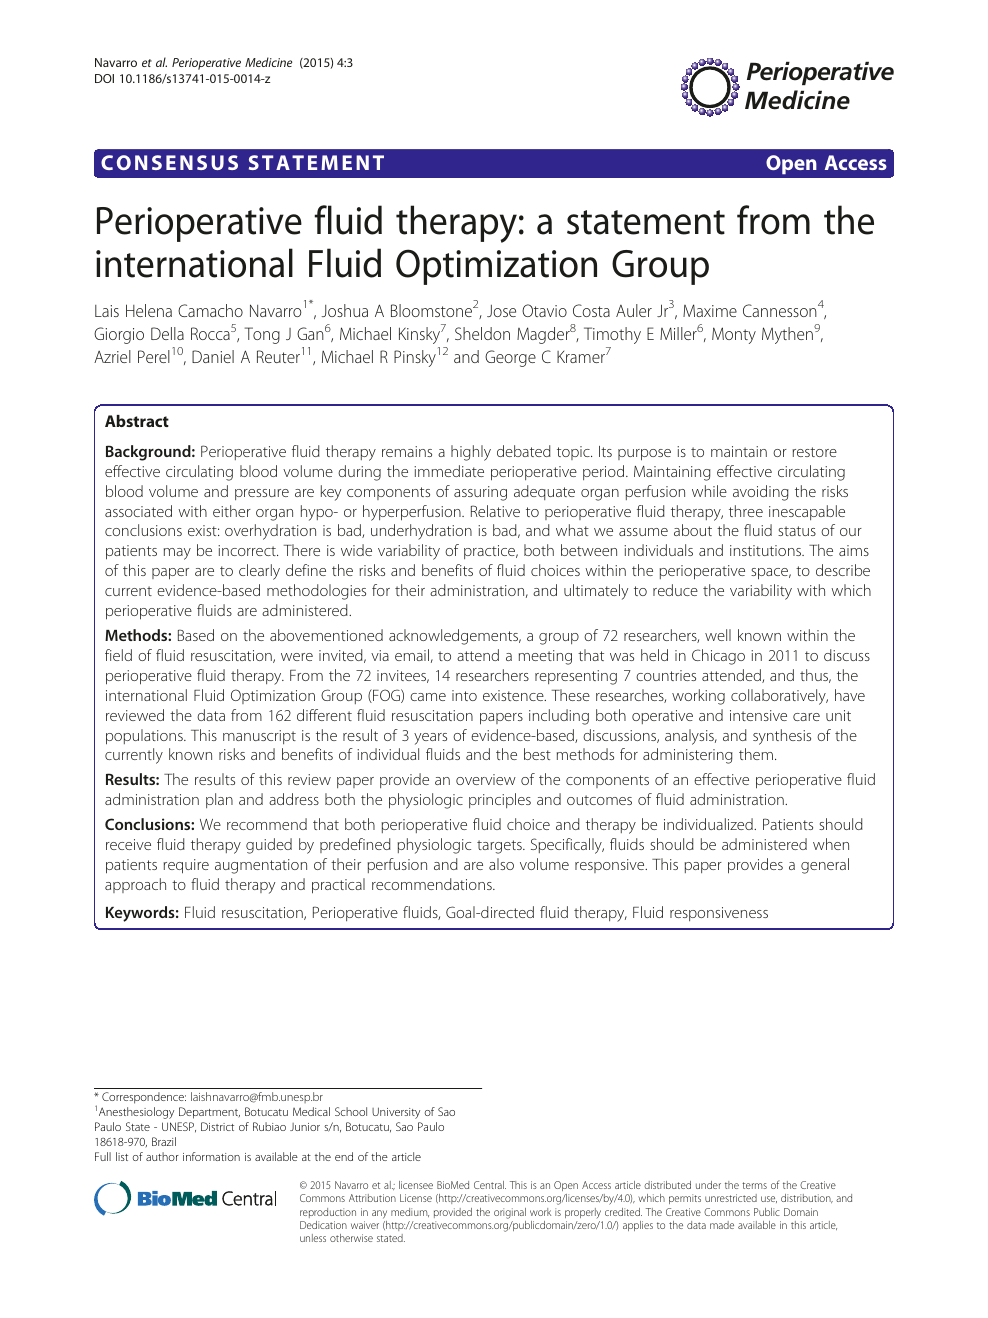 Perioperative Fluid Therapy A Statement From The International Fluid Optimization Group Topic Of Research Paper In Clinical Medicine Download Scholarly Article Pdf And Read For Free On Cyberleninka Open Science Hub